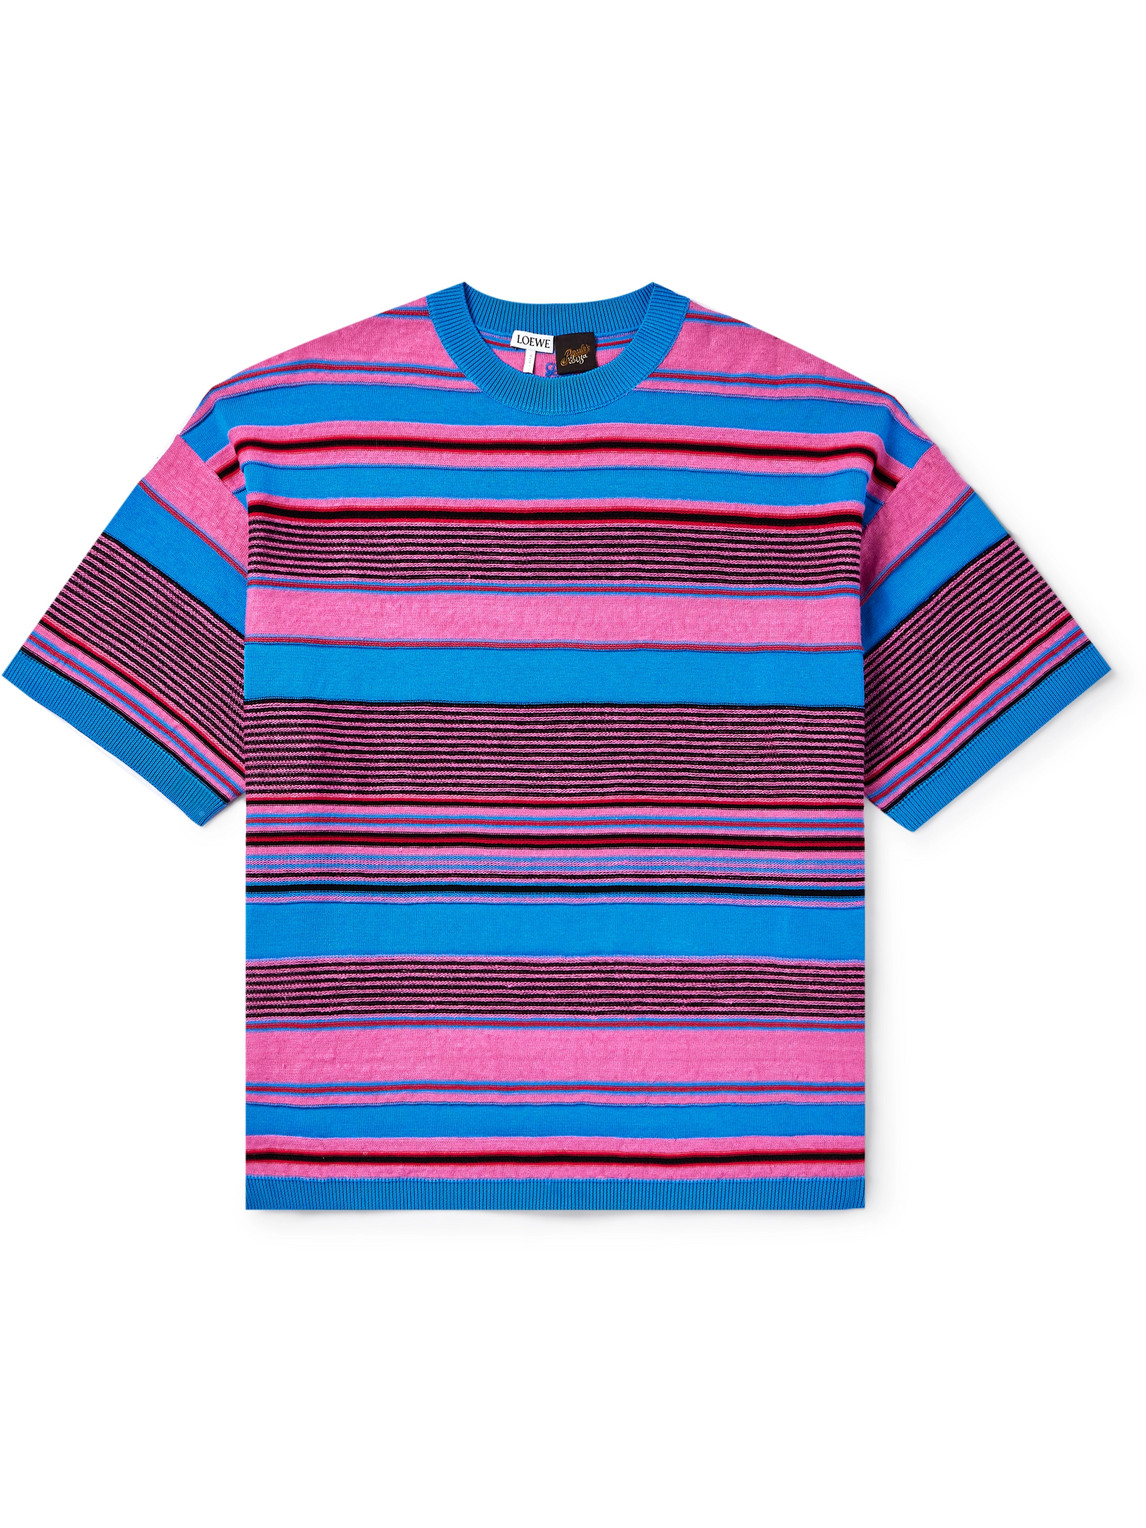 Loewe Paula's Ibiza Striped Cotton And Linen-blend T-shirt In Pink